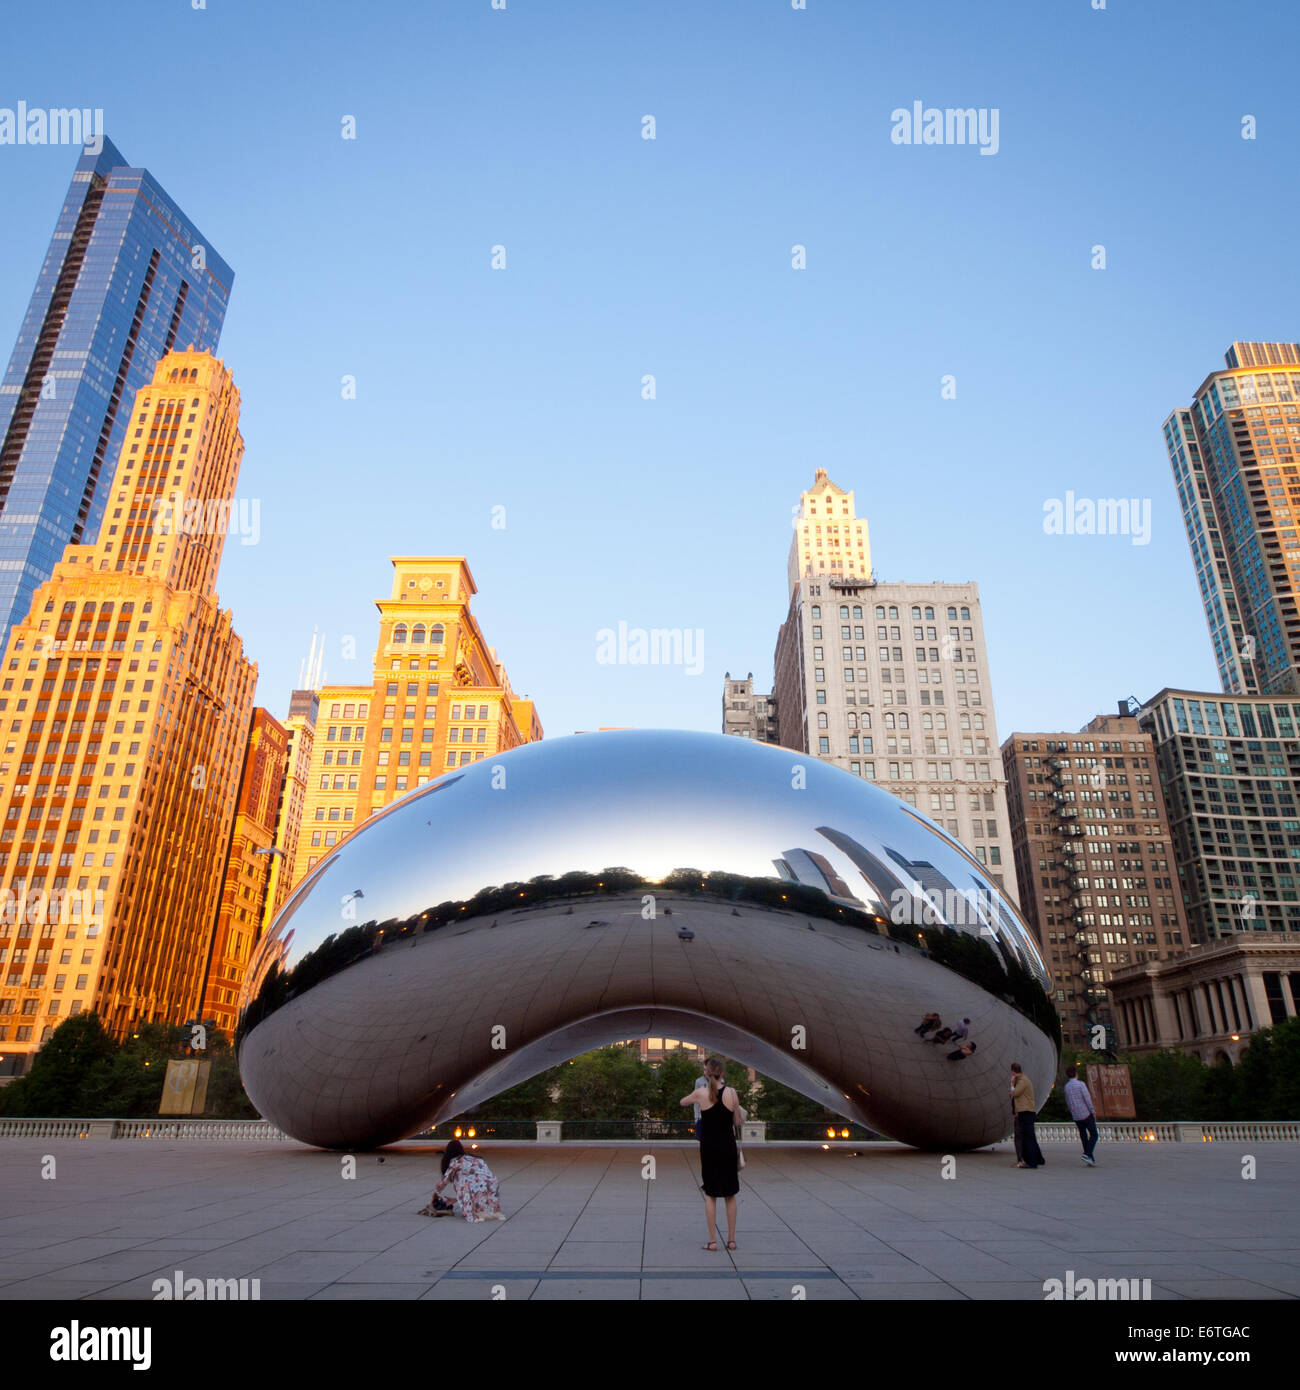 Cloud Gate (The Bean), a public sculpture by Anish Kapoor, in early morning light.  Millennium Park, Chicago, Illinois. Stock Photo